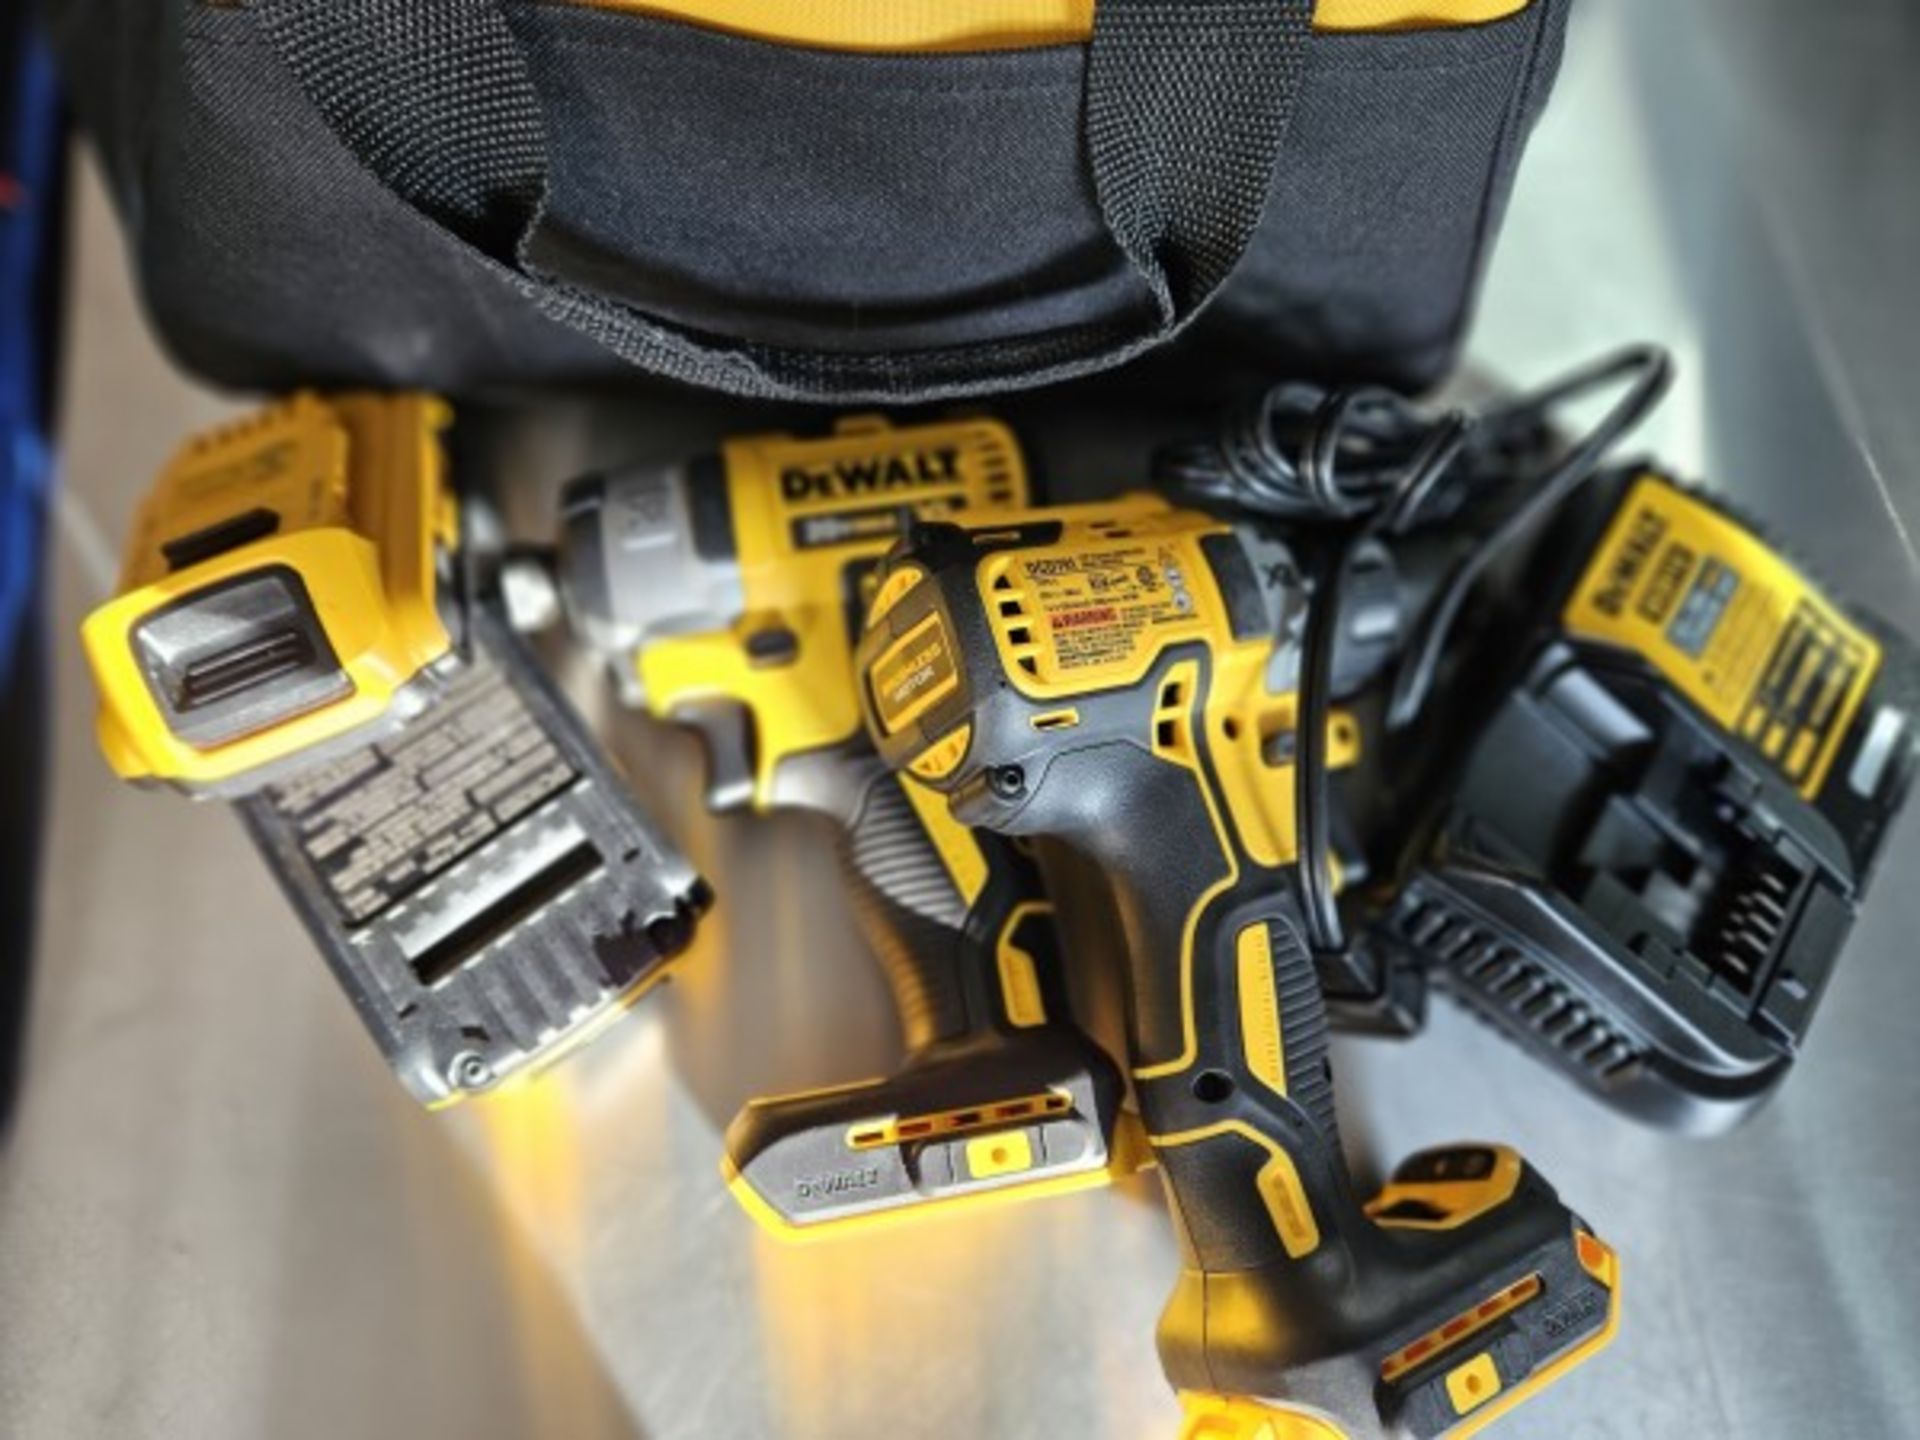 DEWALT CORDLESS DRILL DRIVER AND IMPACT DRIVER W/2 BATTERIES (UNUSED) See terms in full description - Image 2 of 2